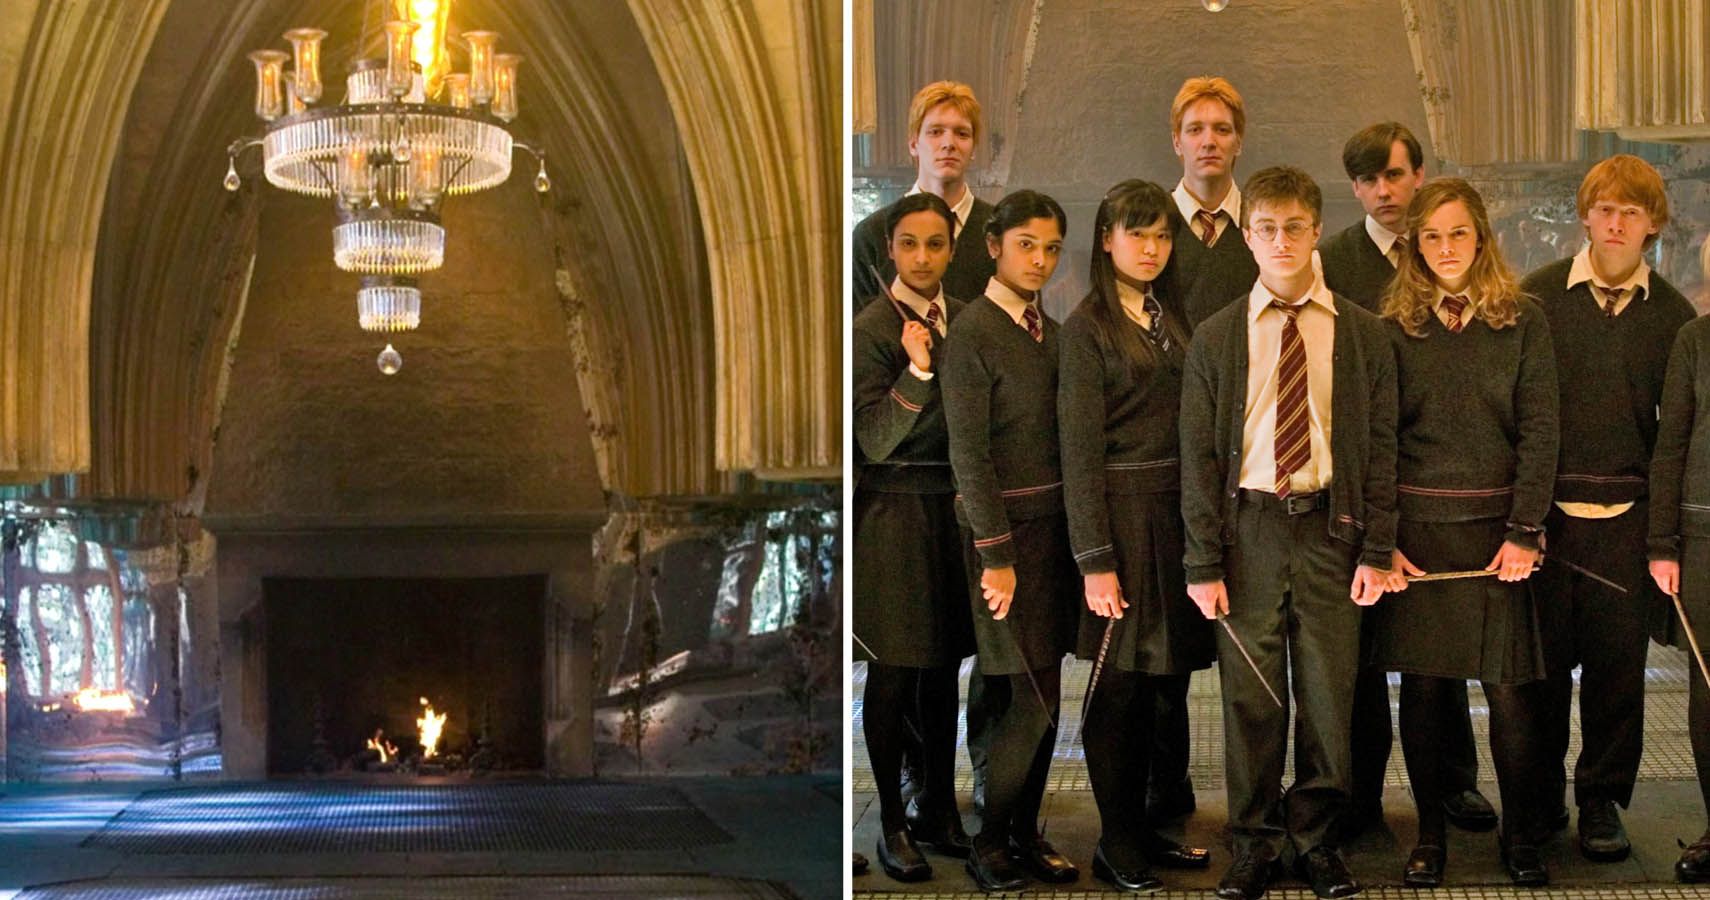 Harry Potter: 10 Room Of Requirement Scenes The Movies Didn\'t Show